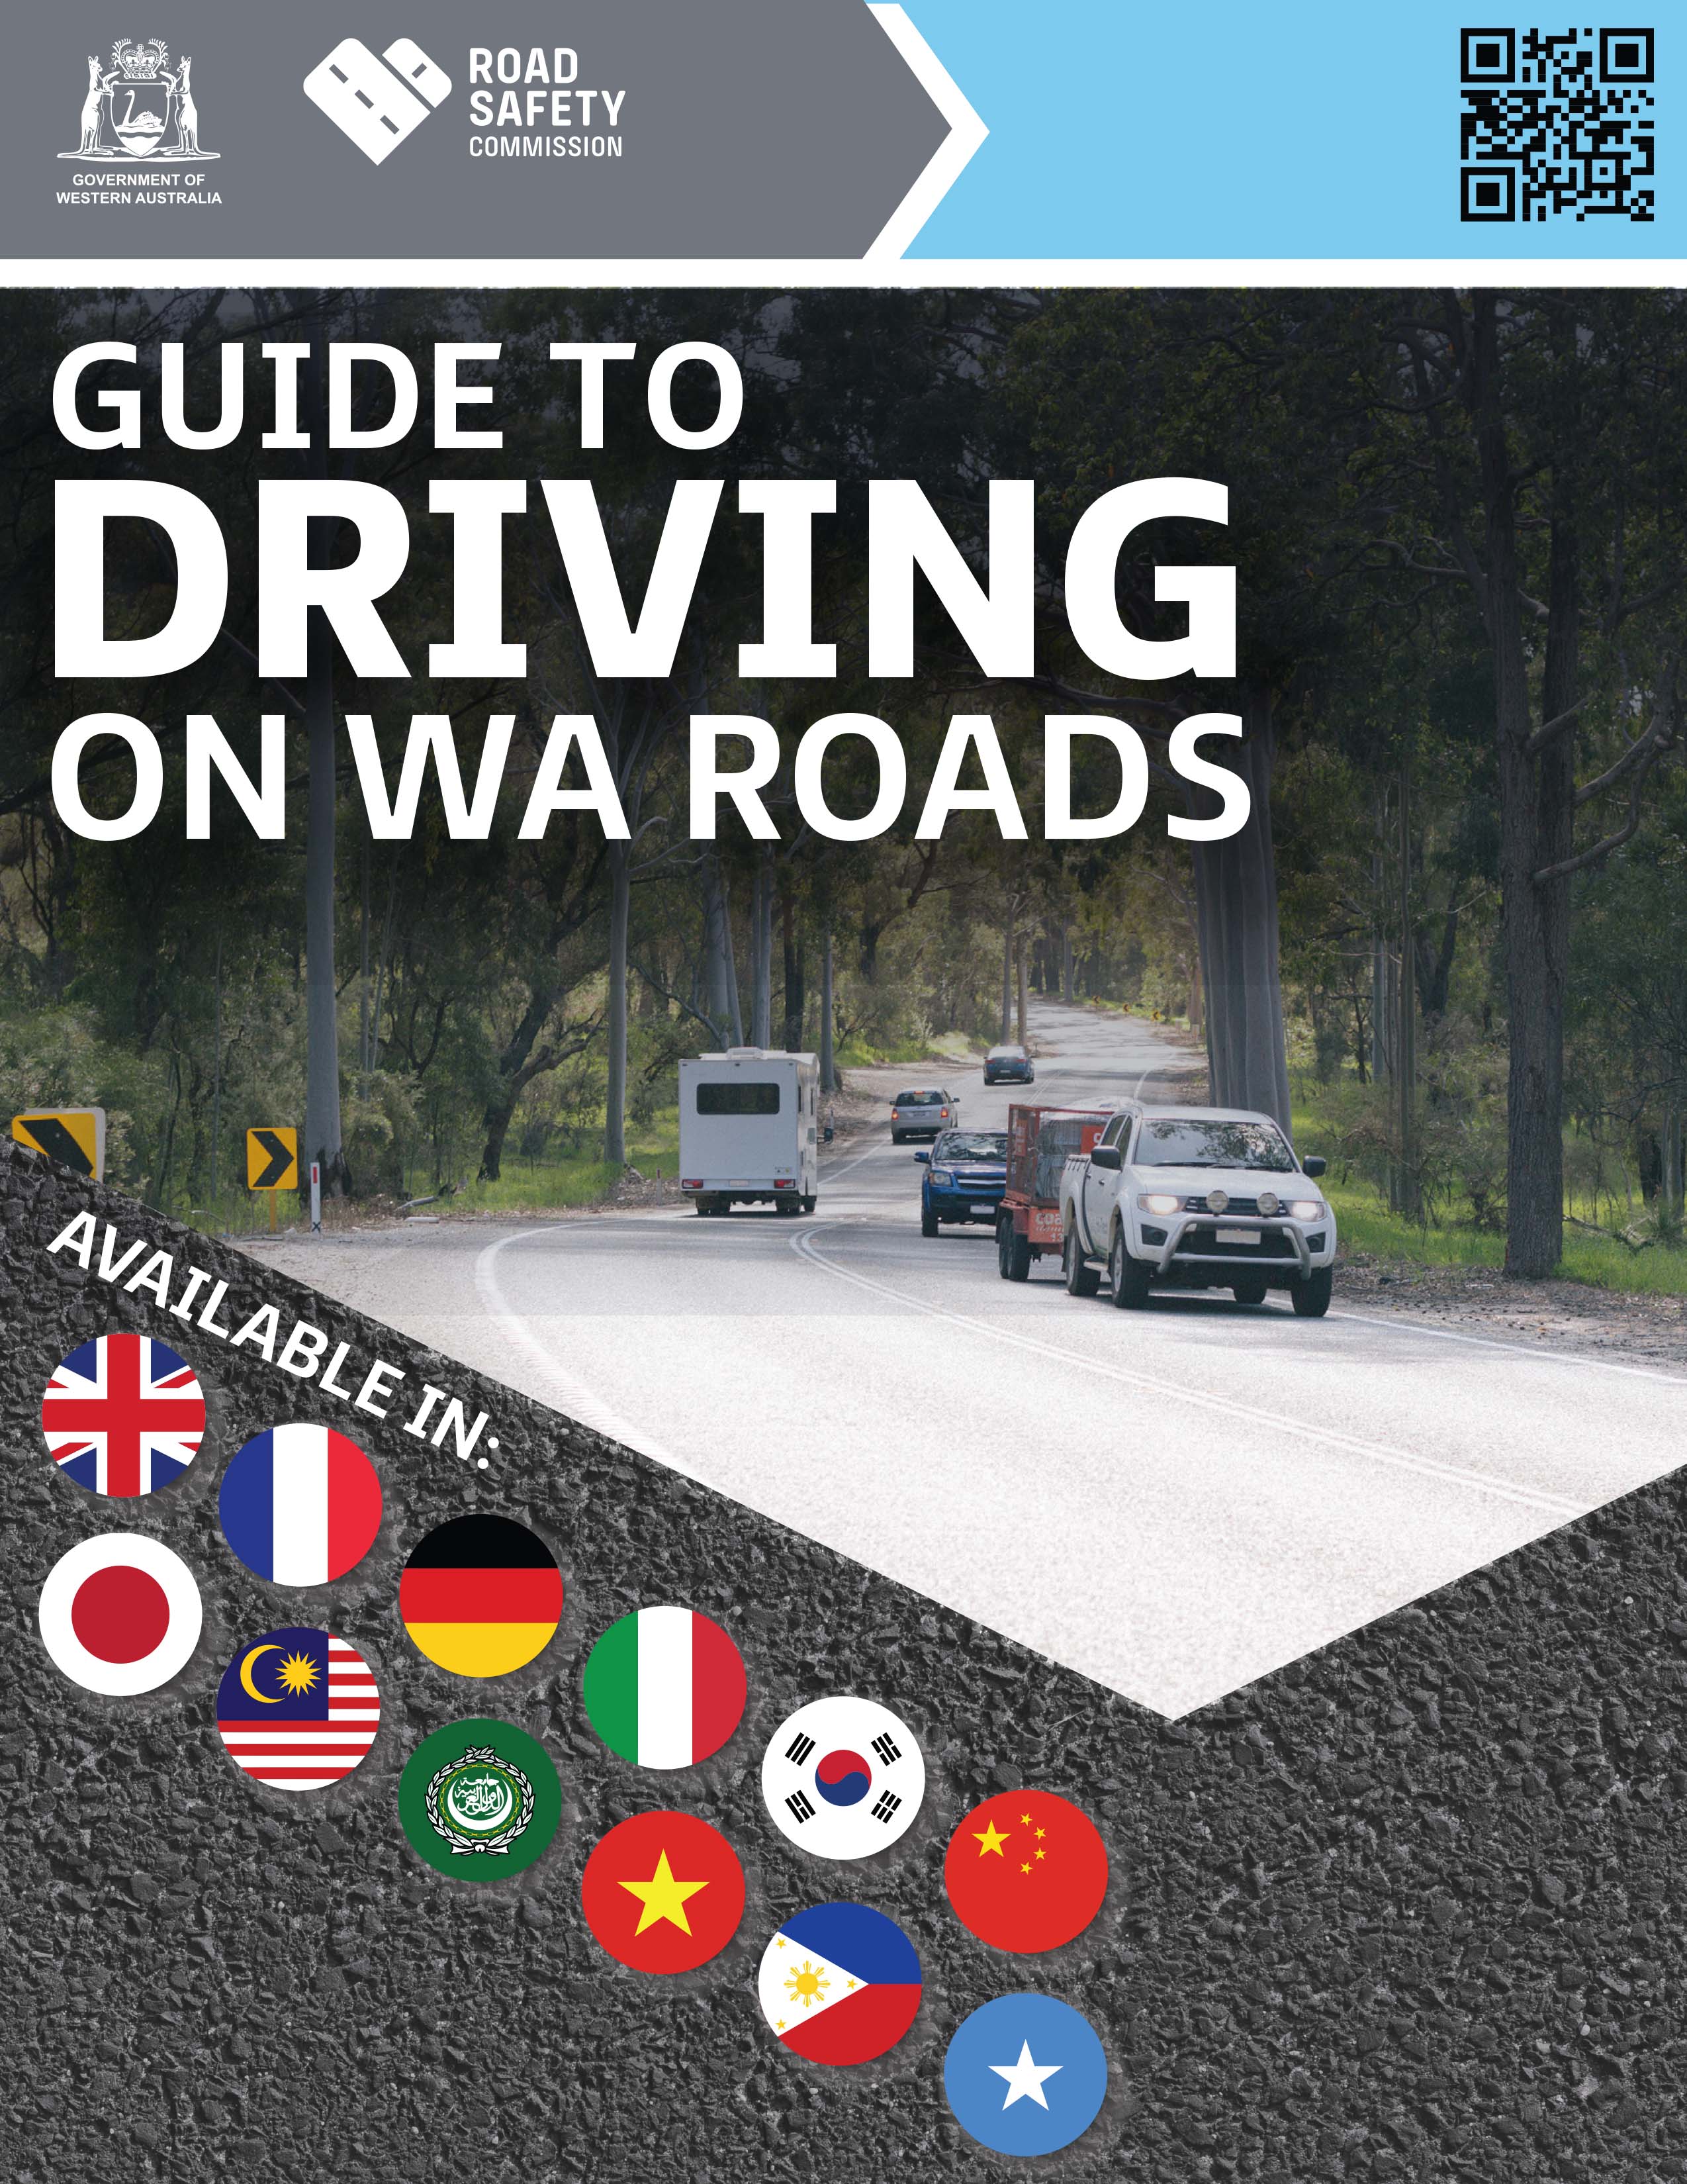 Guide to Driving on WA Roads feature image